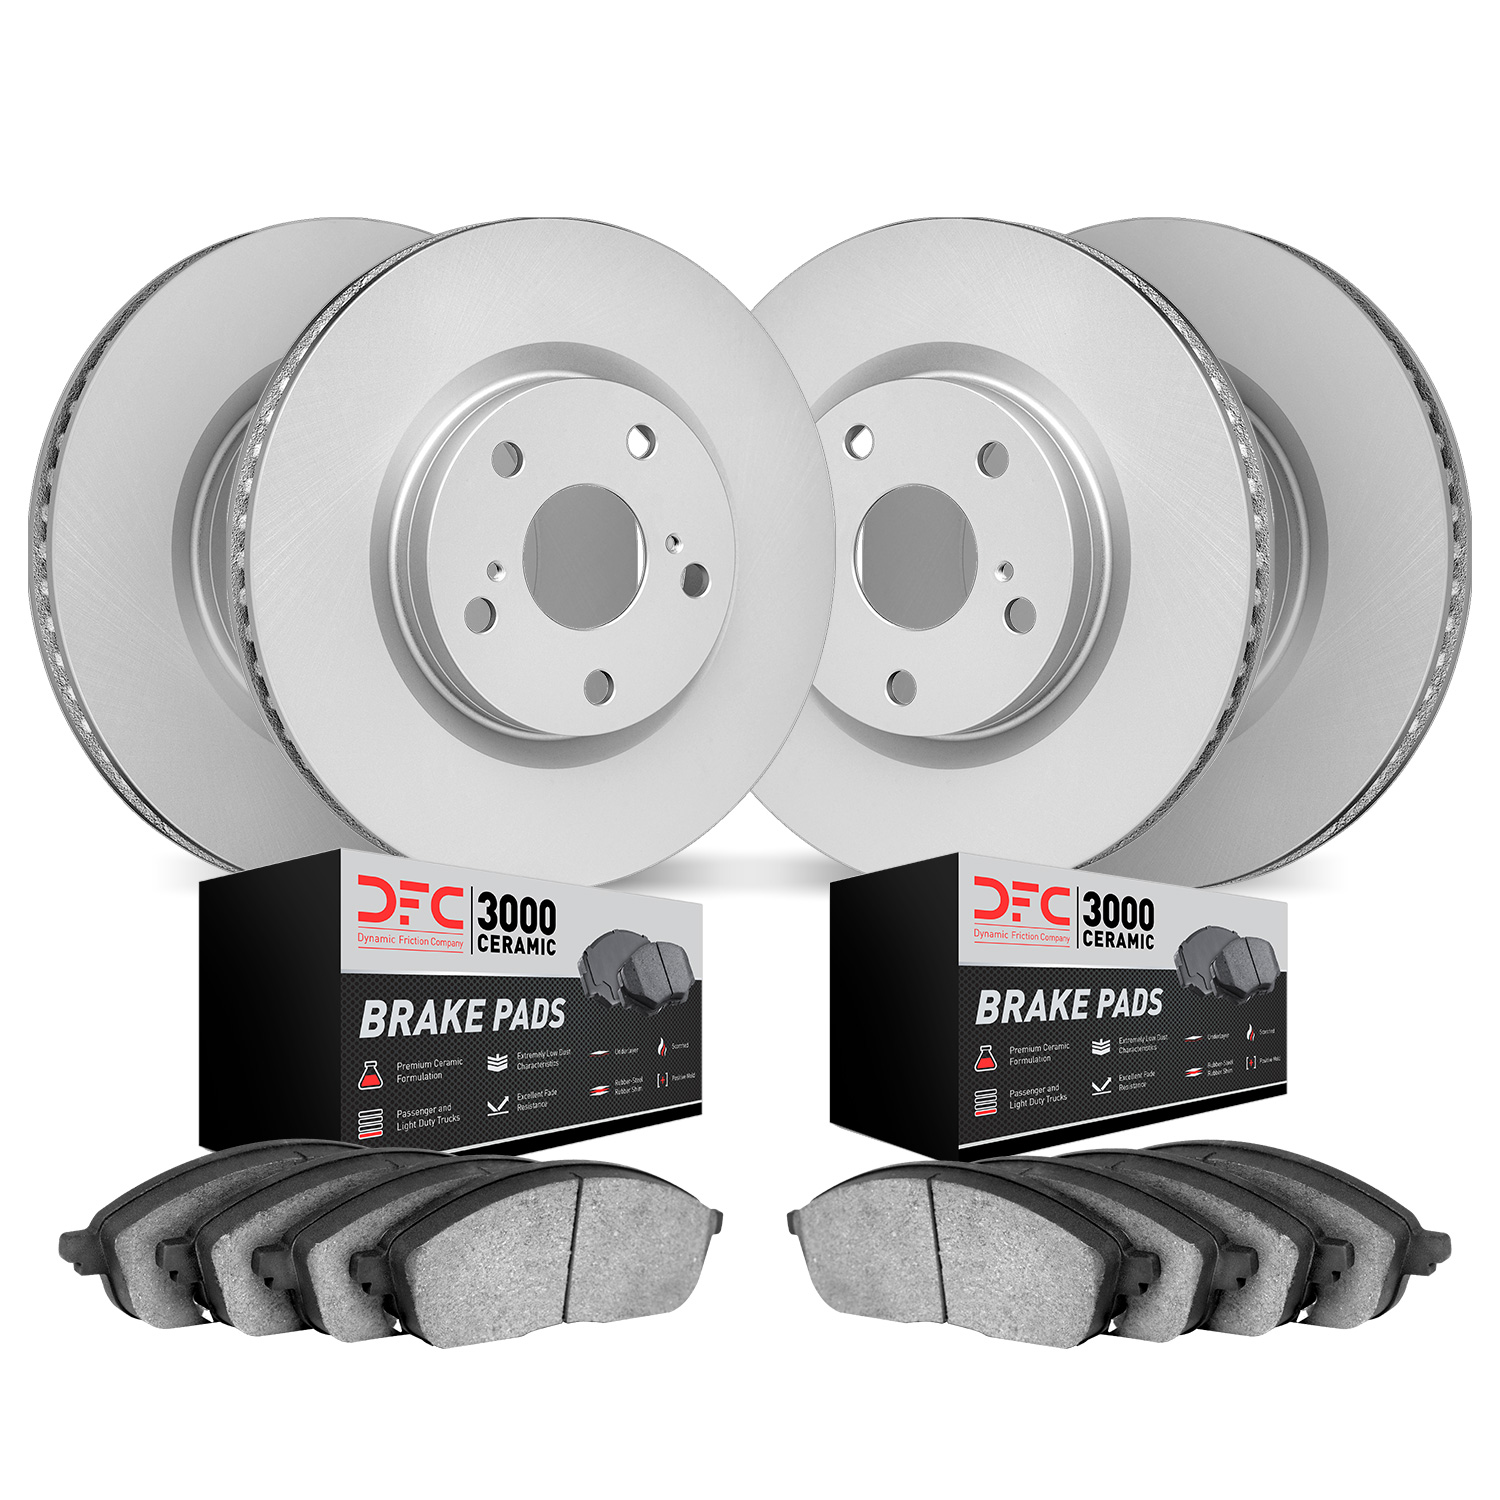 4304-31002 Geospec Brake Rotors with 3000-Series Ceramic Brake Pads Kit, 2001-2005 BMW, Position: Front and Rear